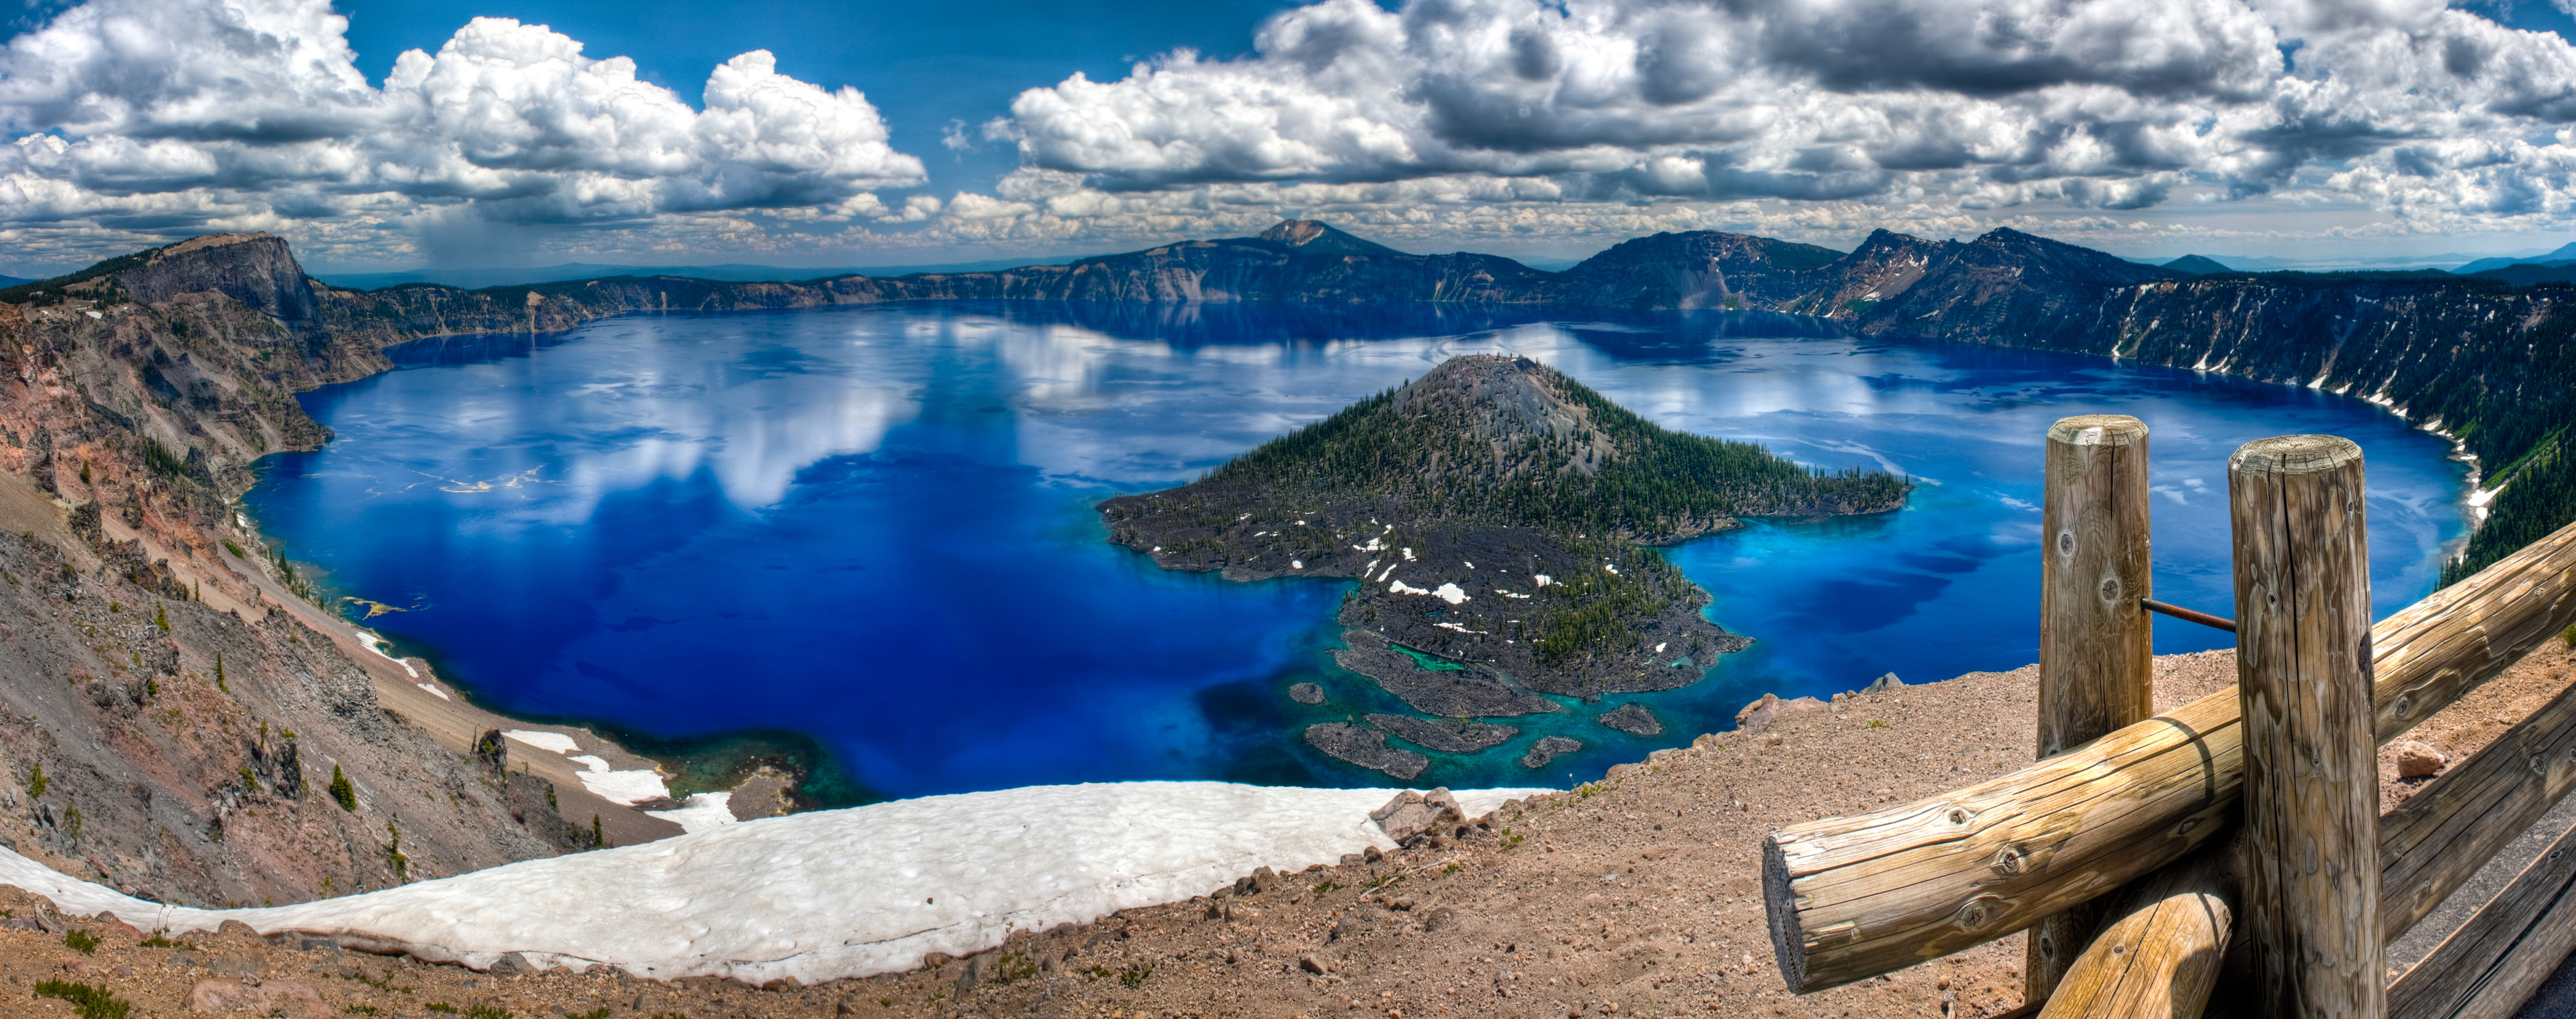 Gallery For Crater Lake National Park Wallpaper